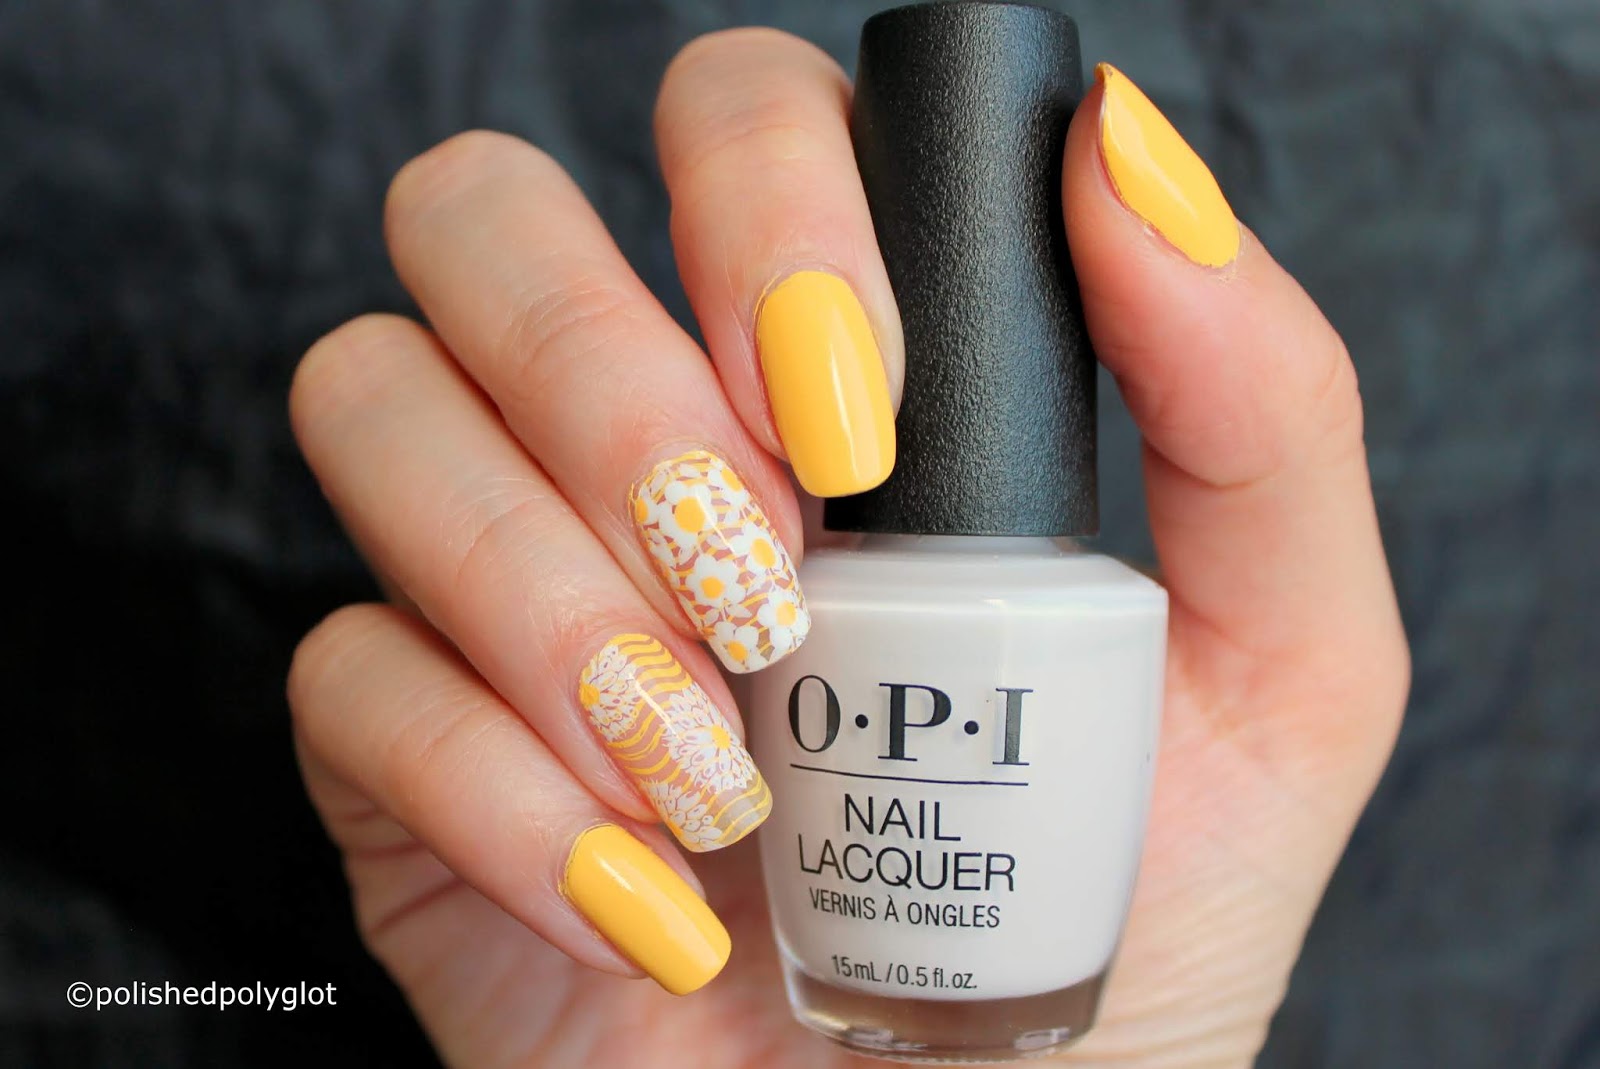 Nail Art │ Yellow and White manicure with Daisies / Polished Polyglot